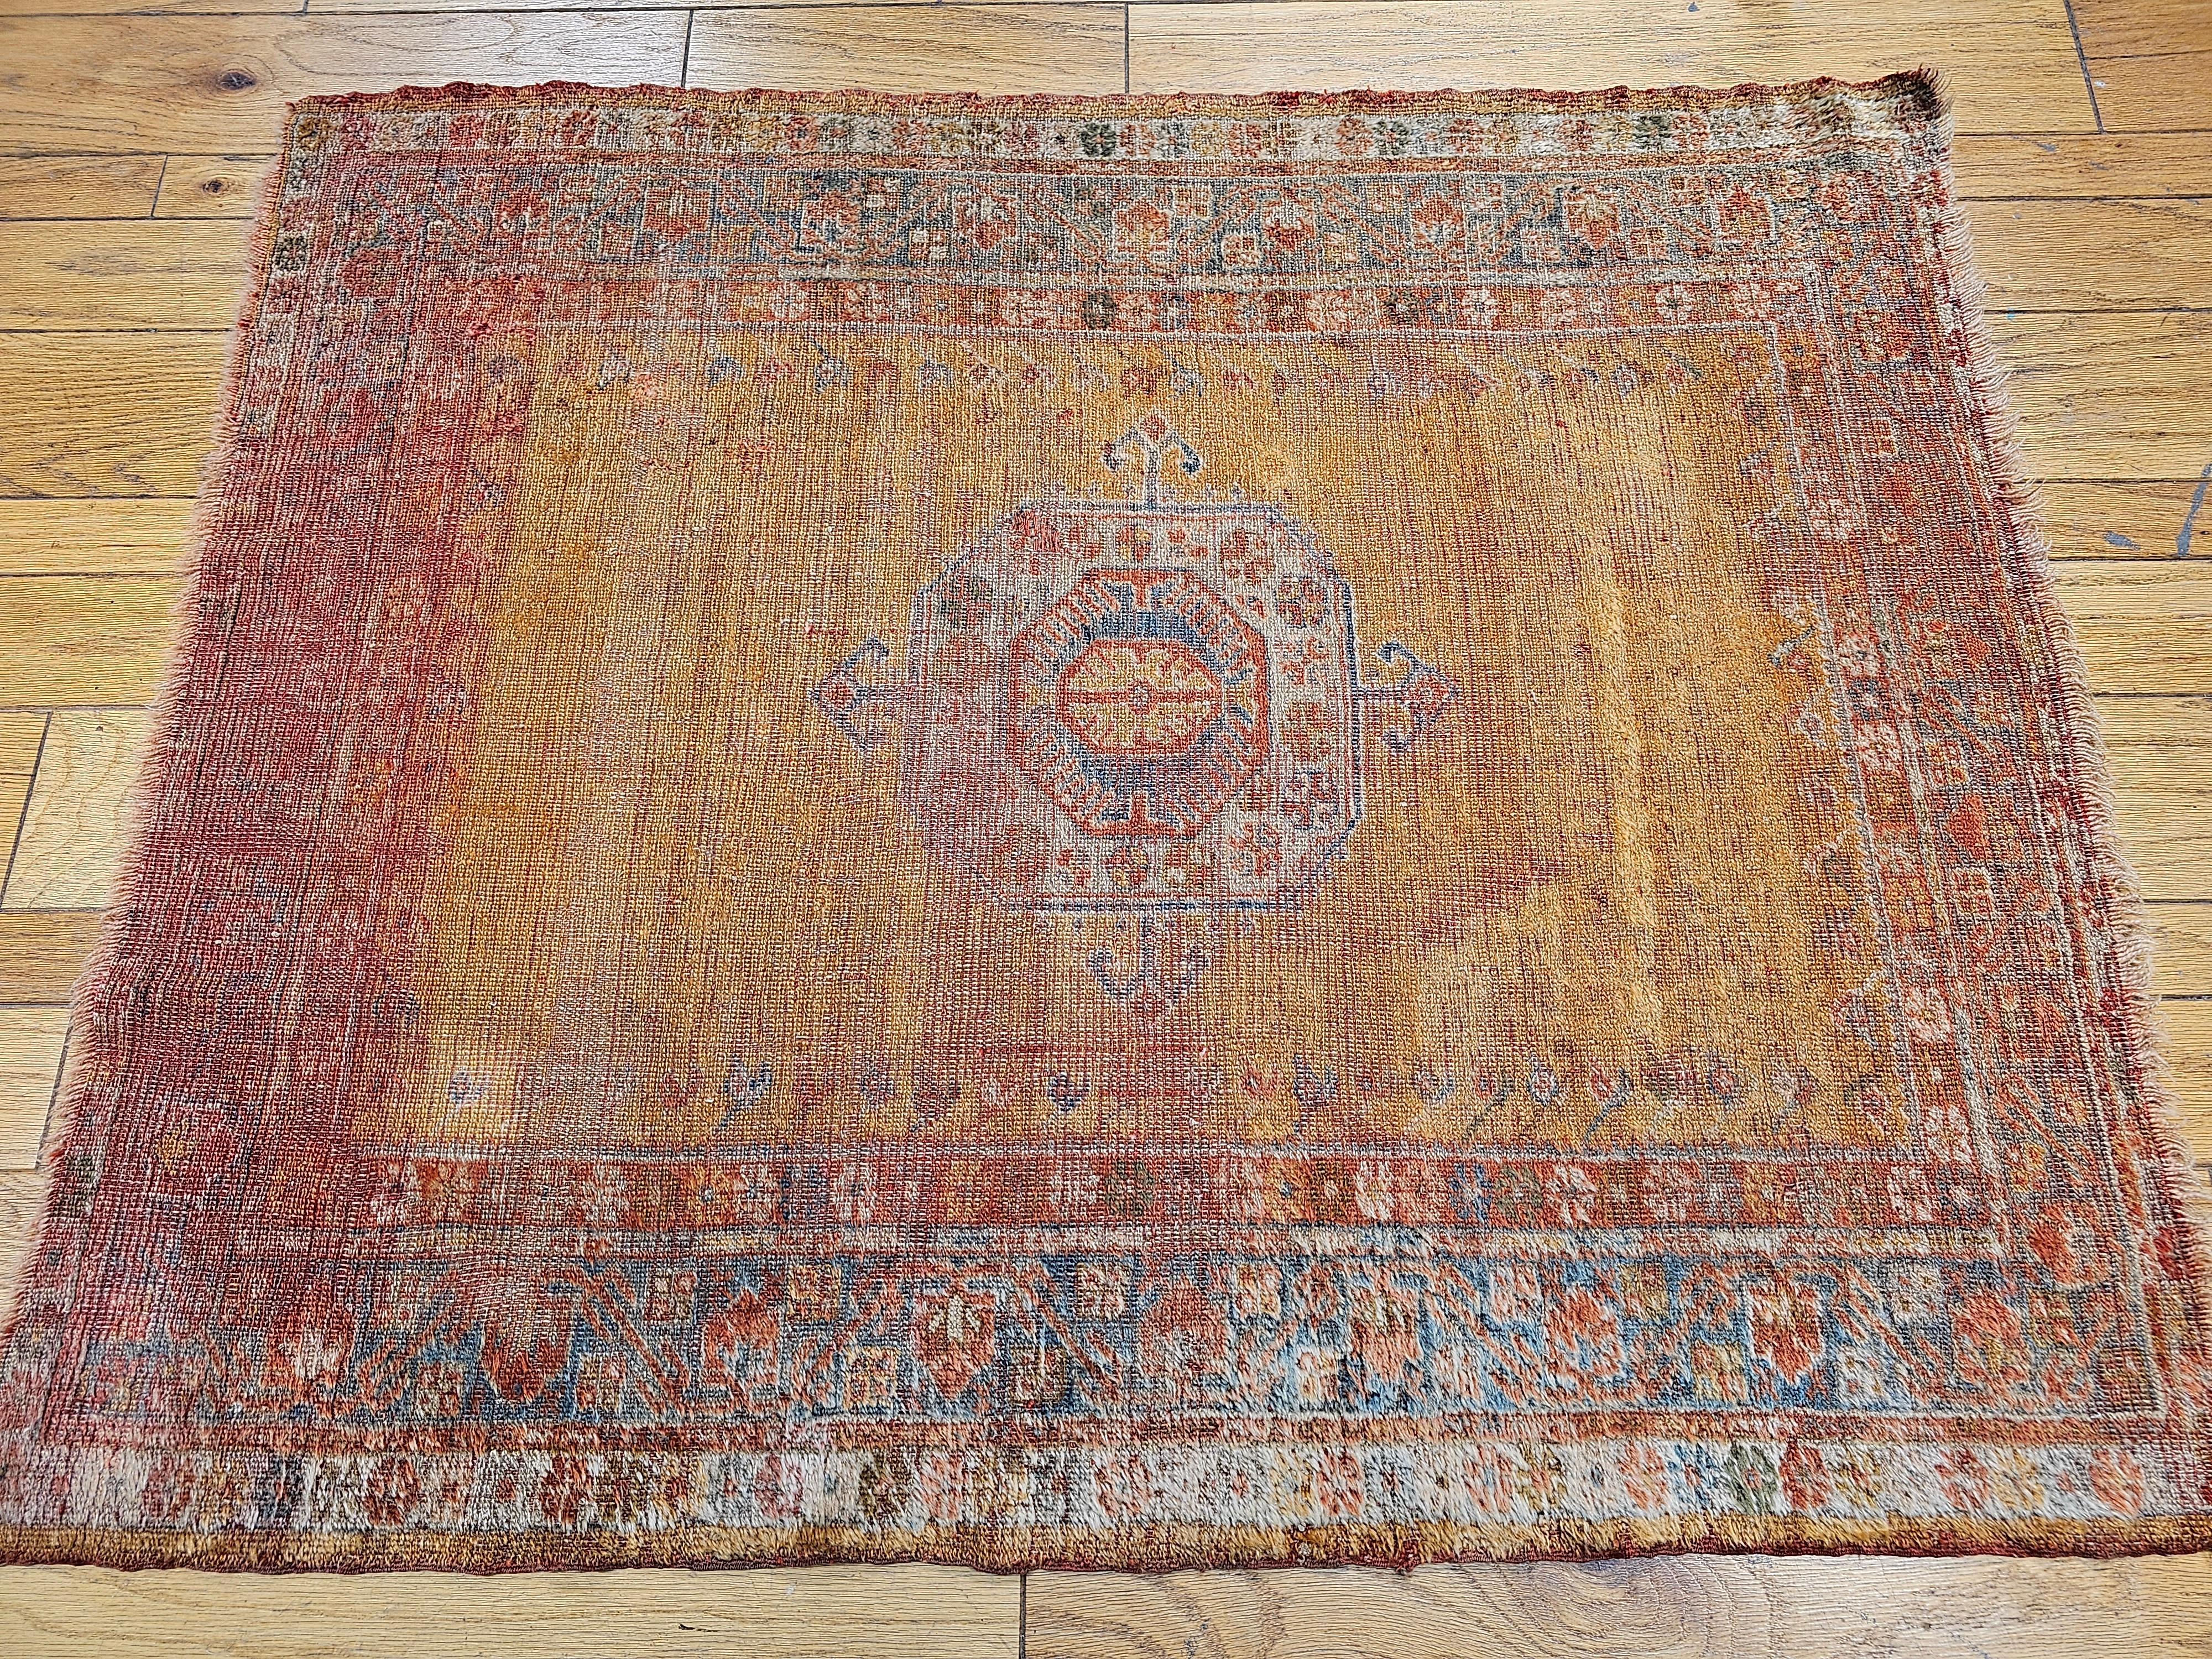 Late 19th Century Turkish Oushak Area Rug in Mamluk Pattern in Saffron, Teal For Sale 8